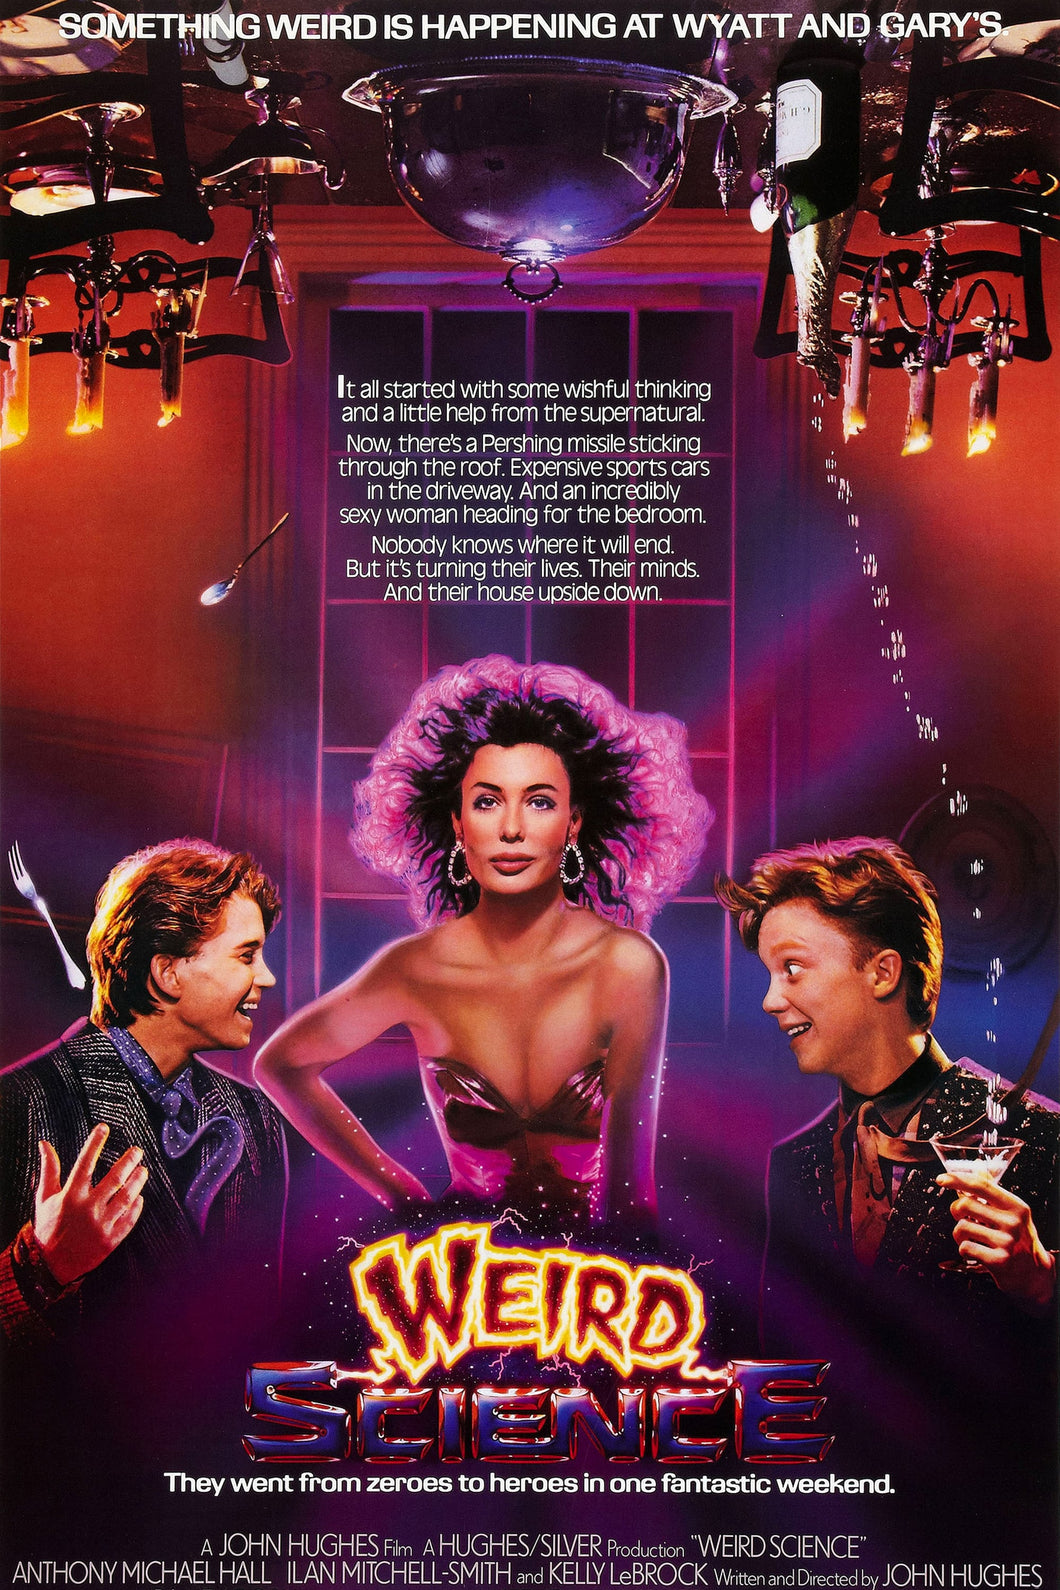 Weird Science (1985)v2(1) Movie Poster High Quality Glossy Paper A1 A2 A3 A4 A3 Framed or Unframed!!!